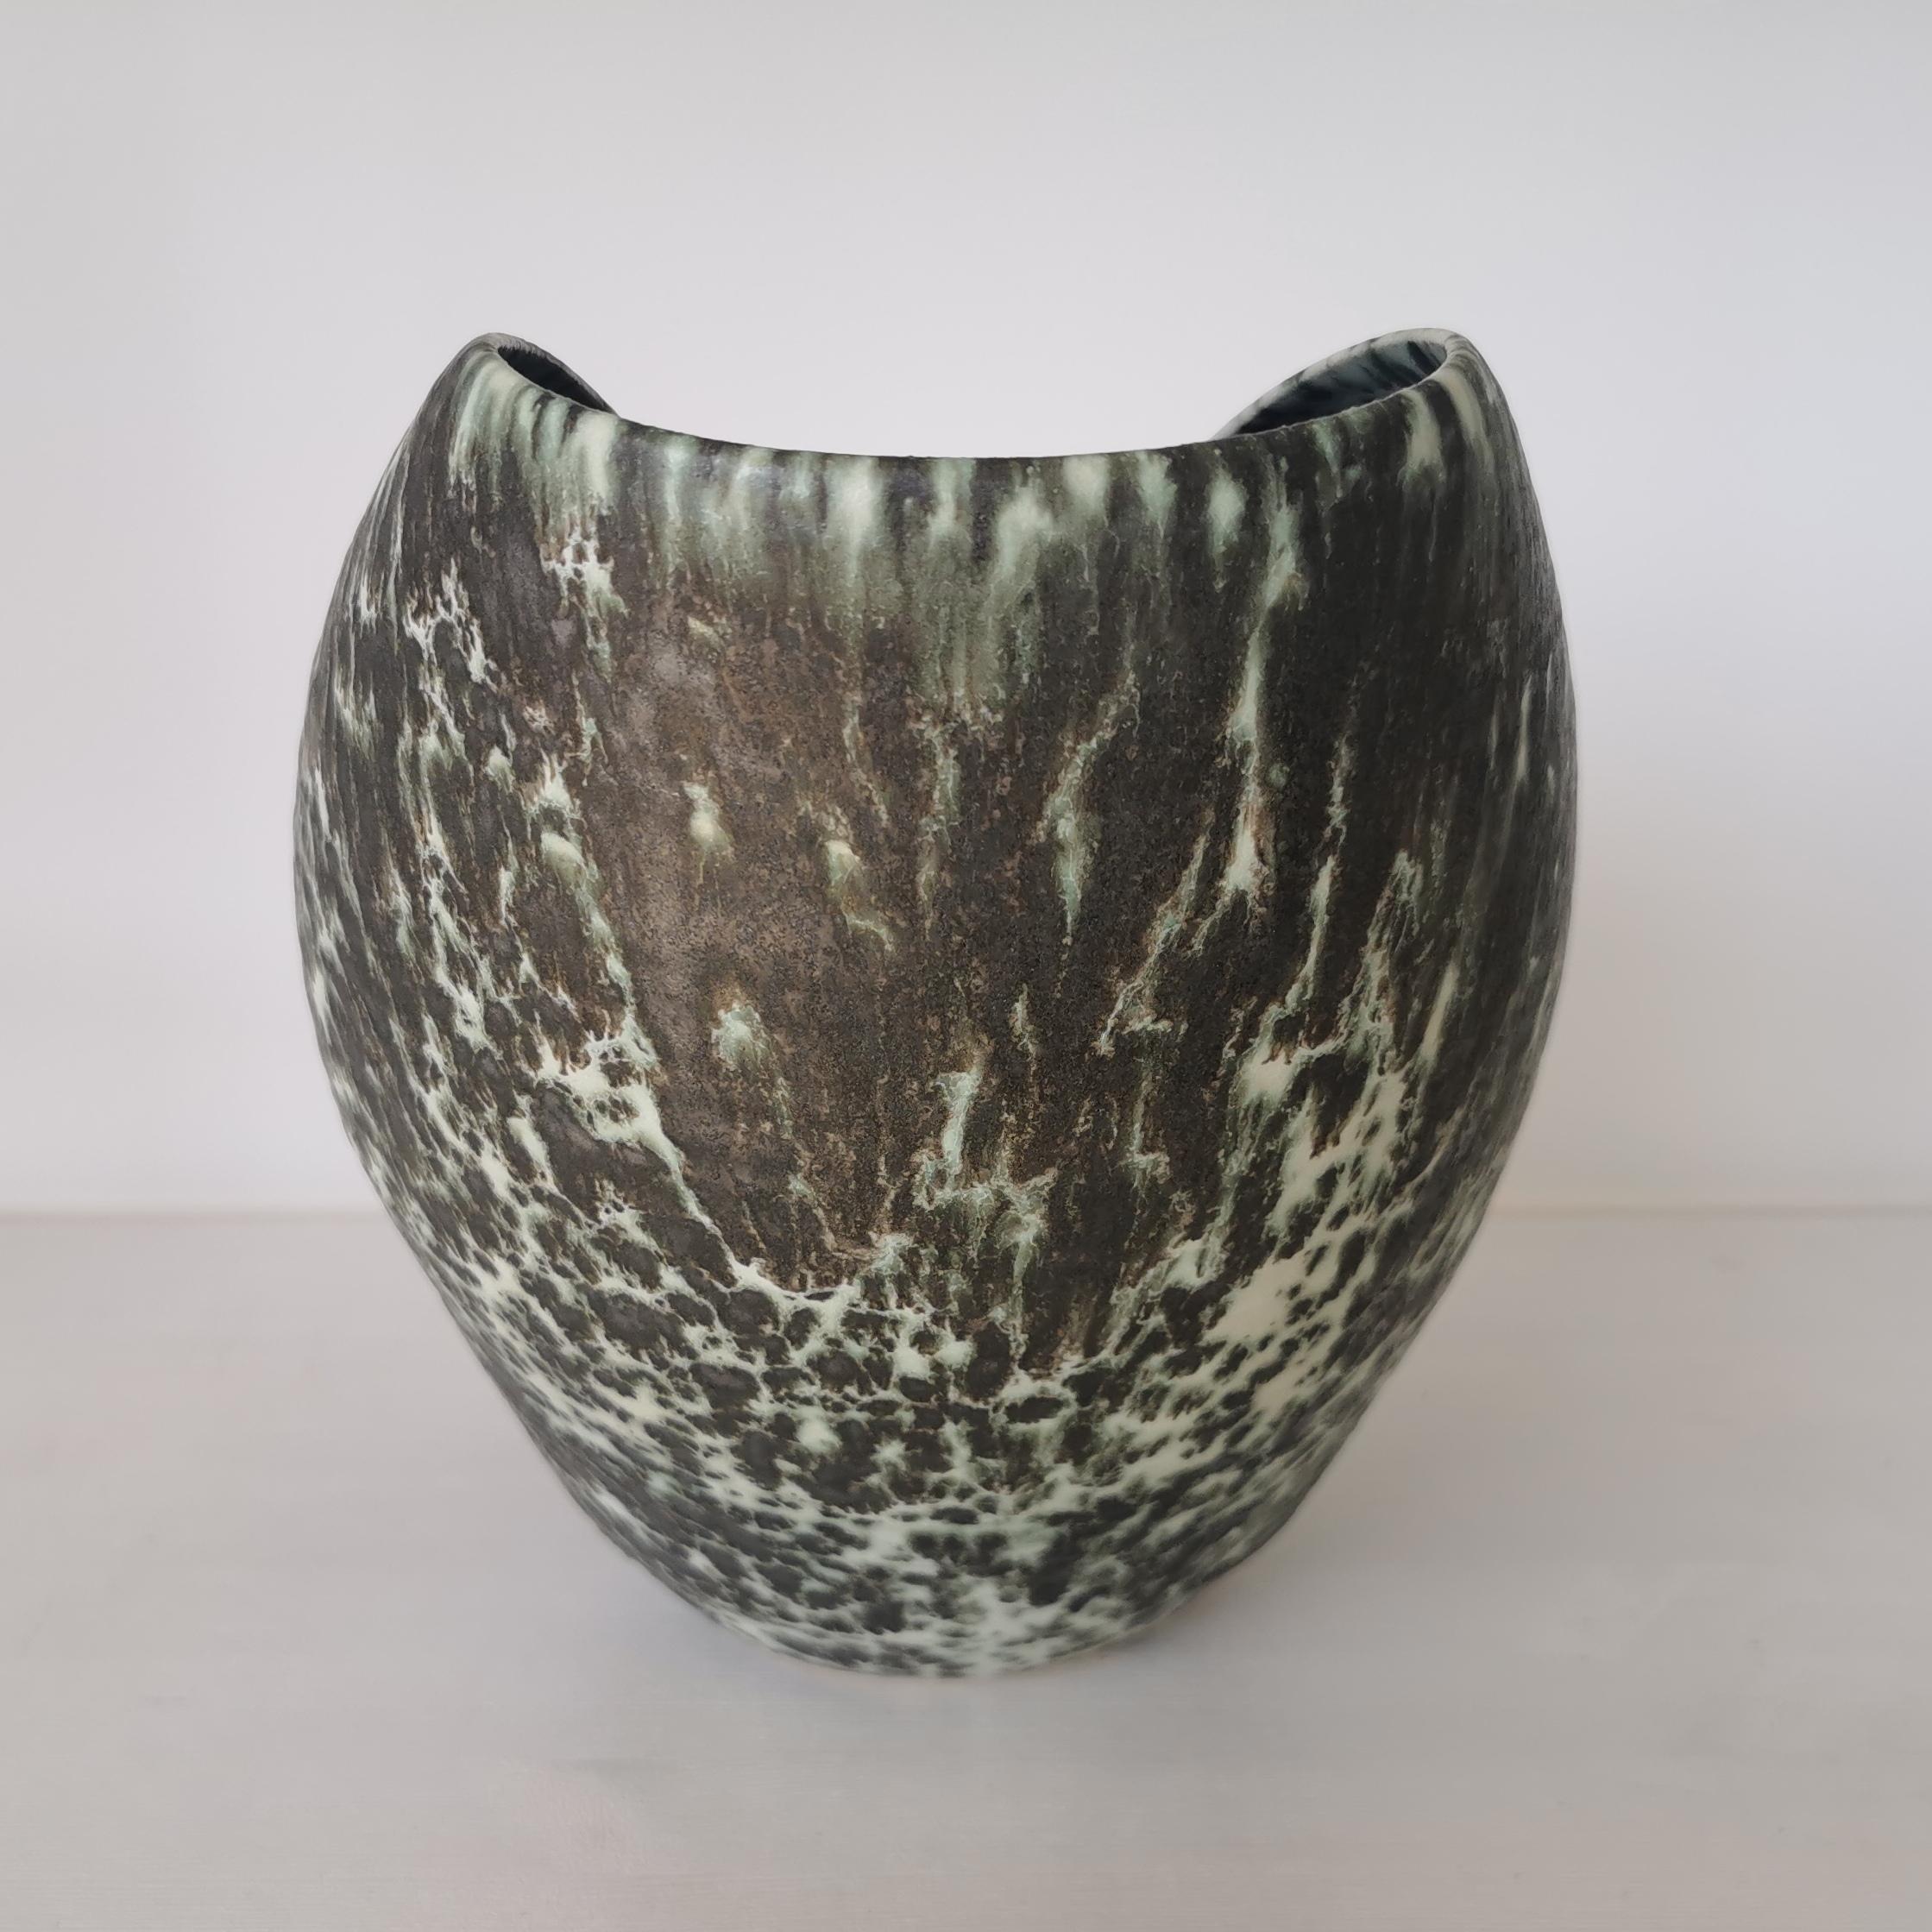 Spanish Oval Form with Green and Black Speckled Glaze, Vessel No.98, Ceramic Sculpture For Sale